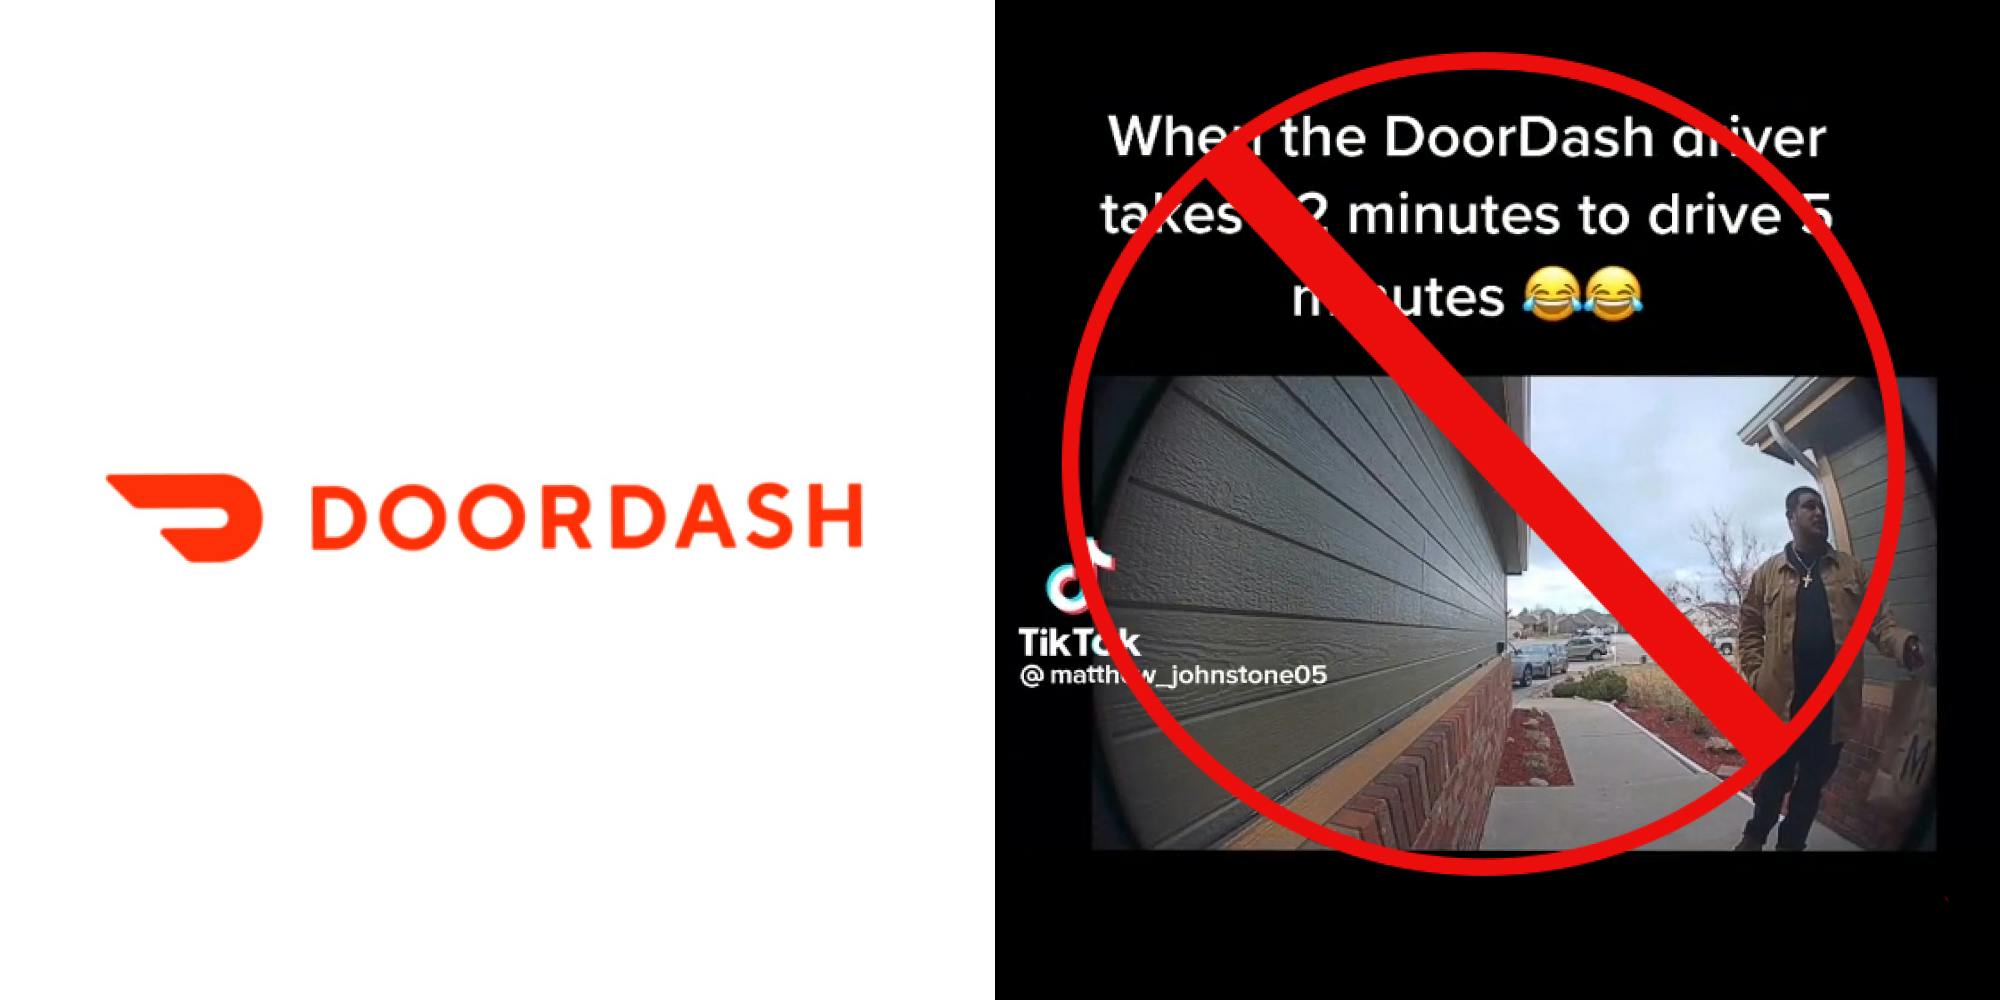 Diary of a DoorDash Driver - Episode 3